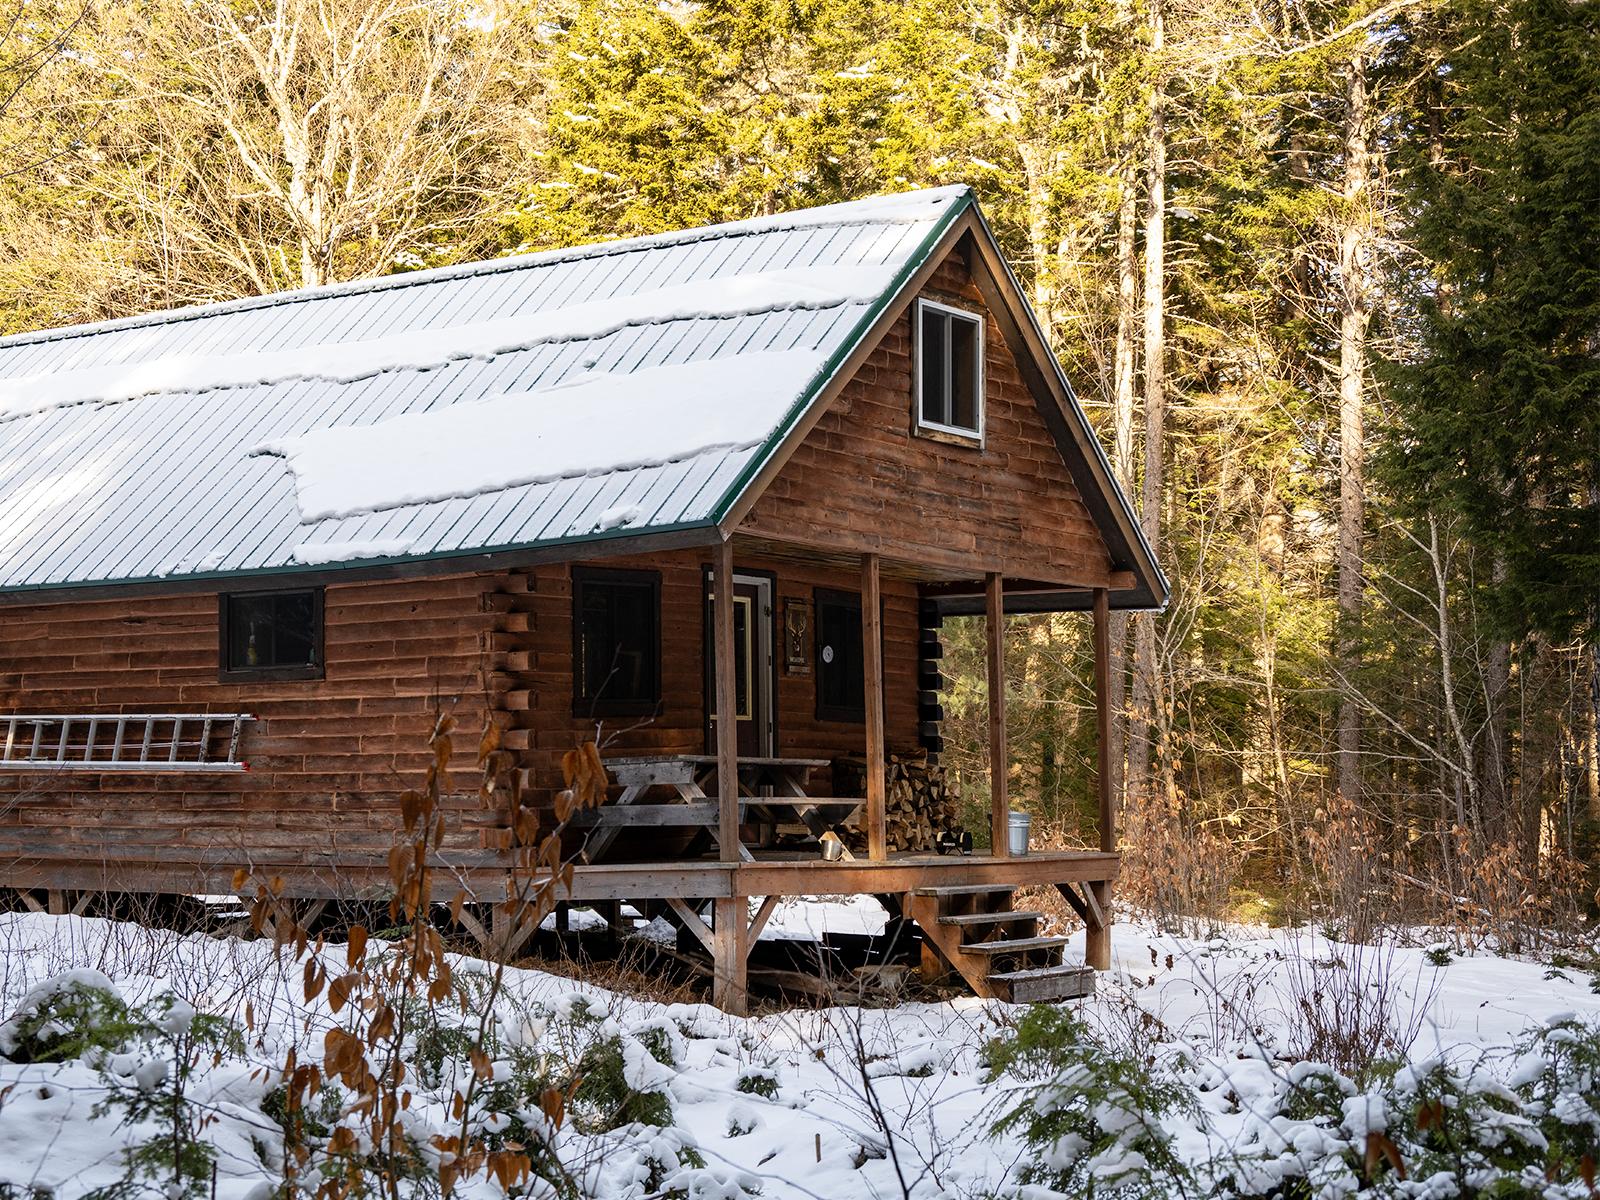 Side view of a log cabin in the woods with snow on the ground.